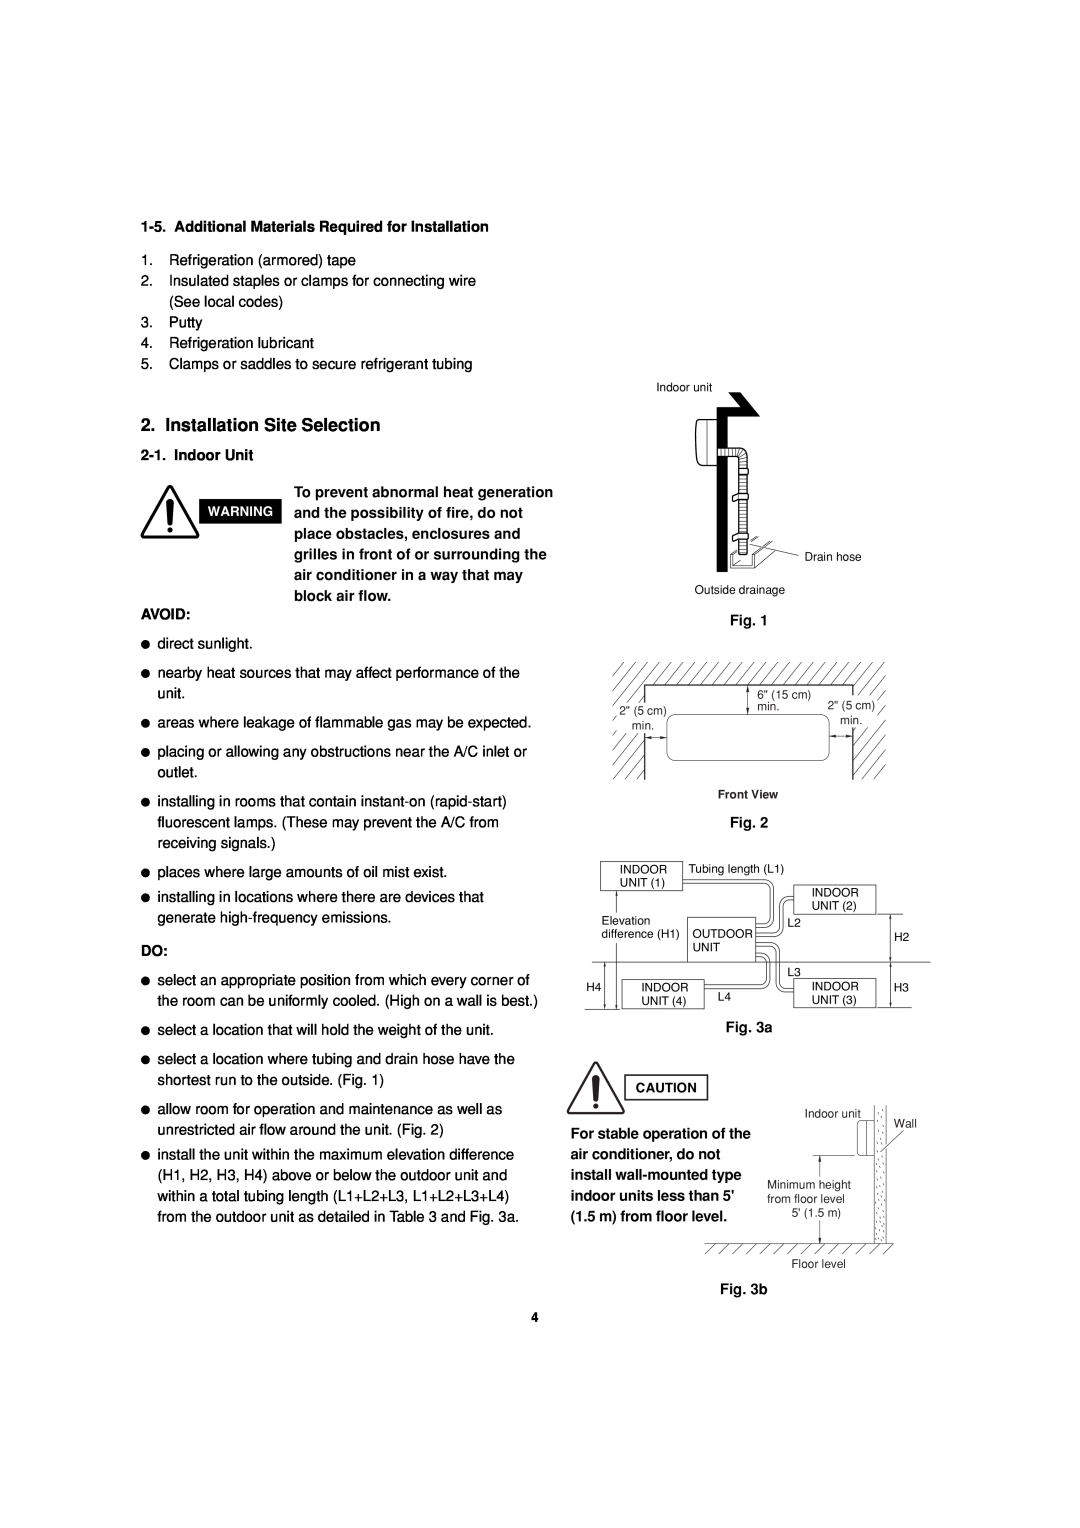 Sanyo KMS1872, KMS2472 service manual Installation Site Selection, Indoor Unit, Avoid, Fig, b 